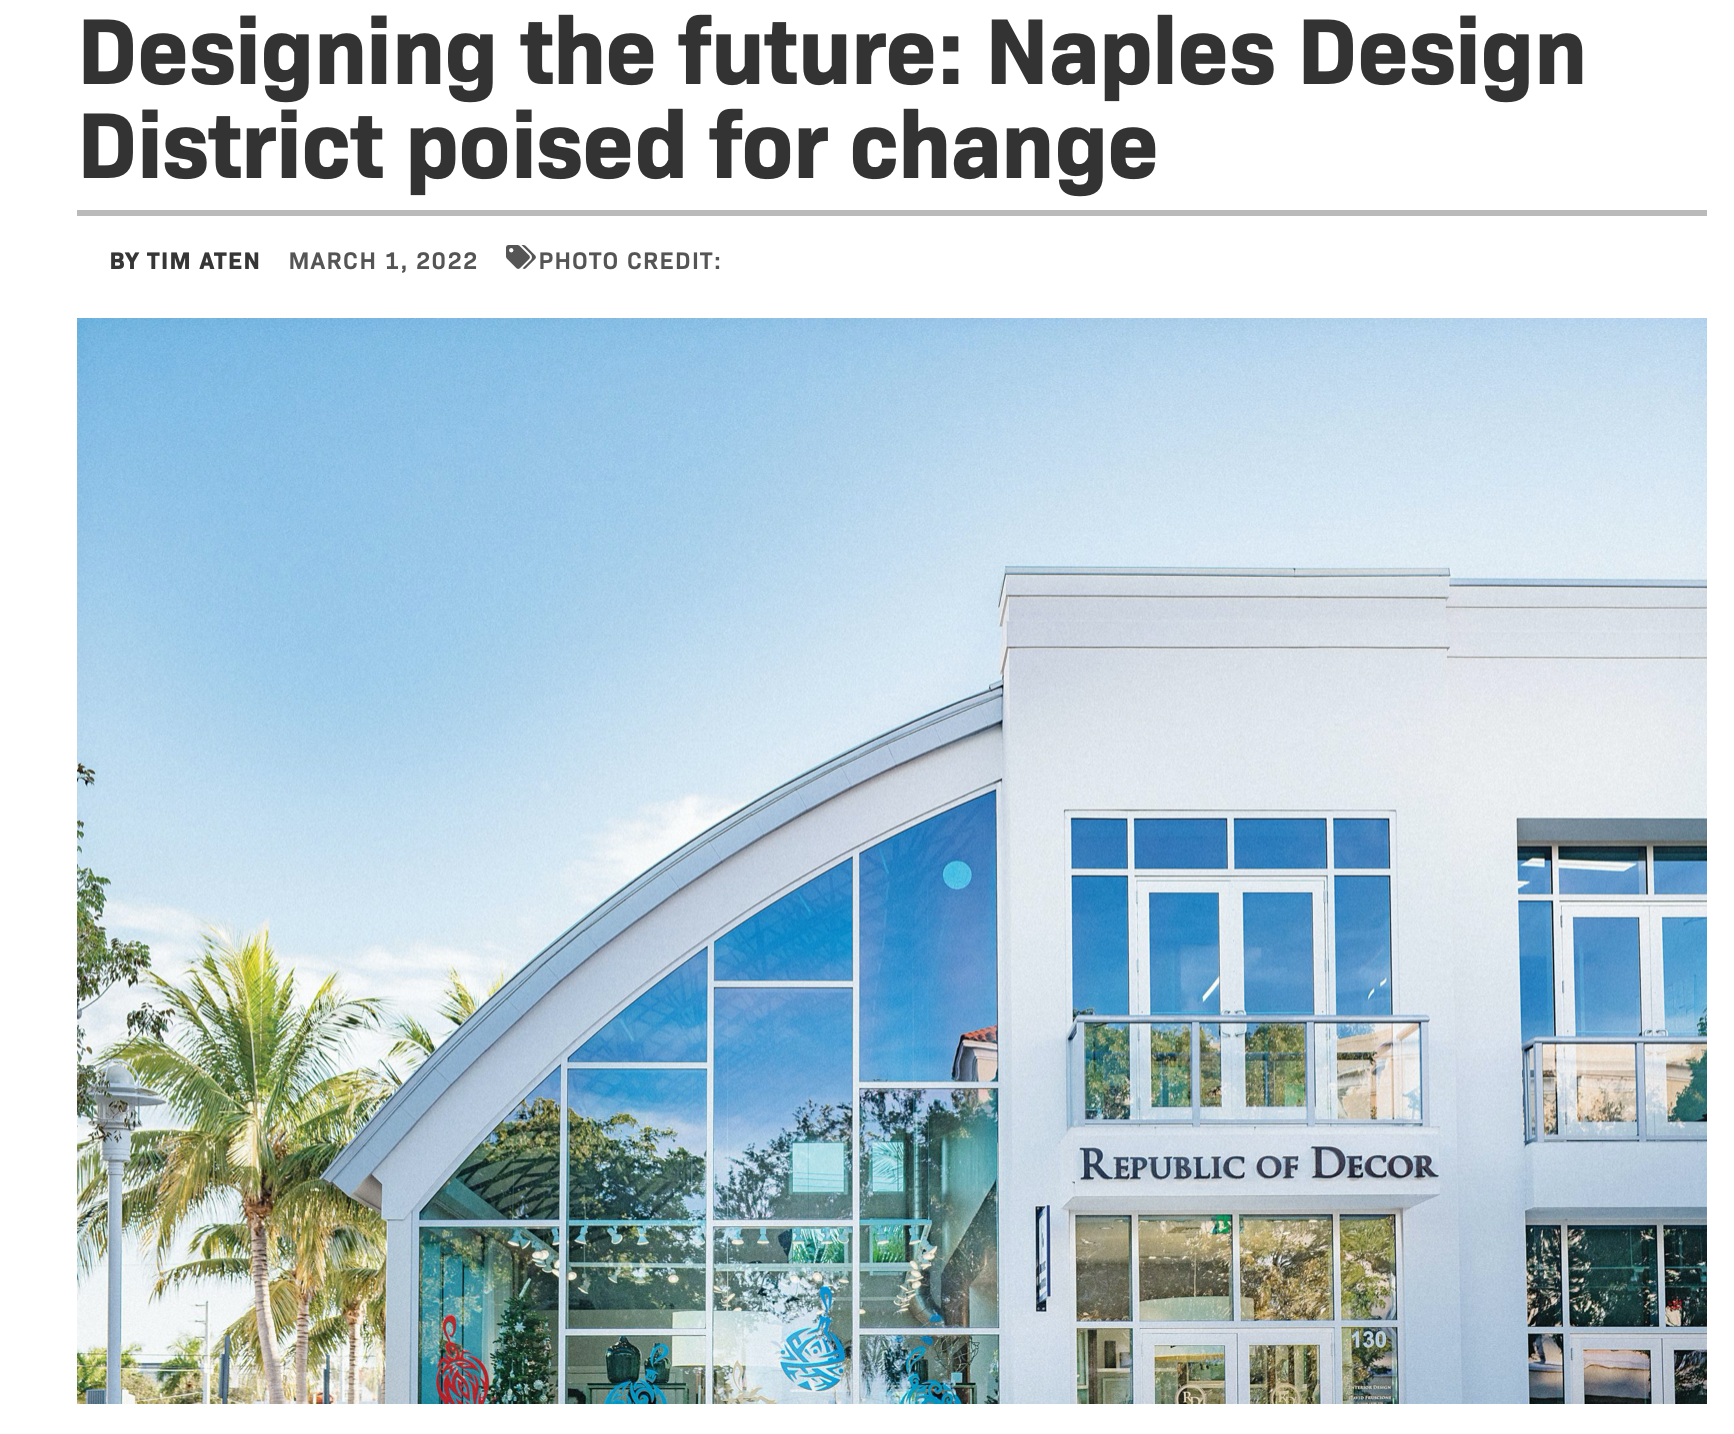 Designing the future: Naples Design District poised for change